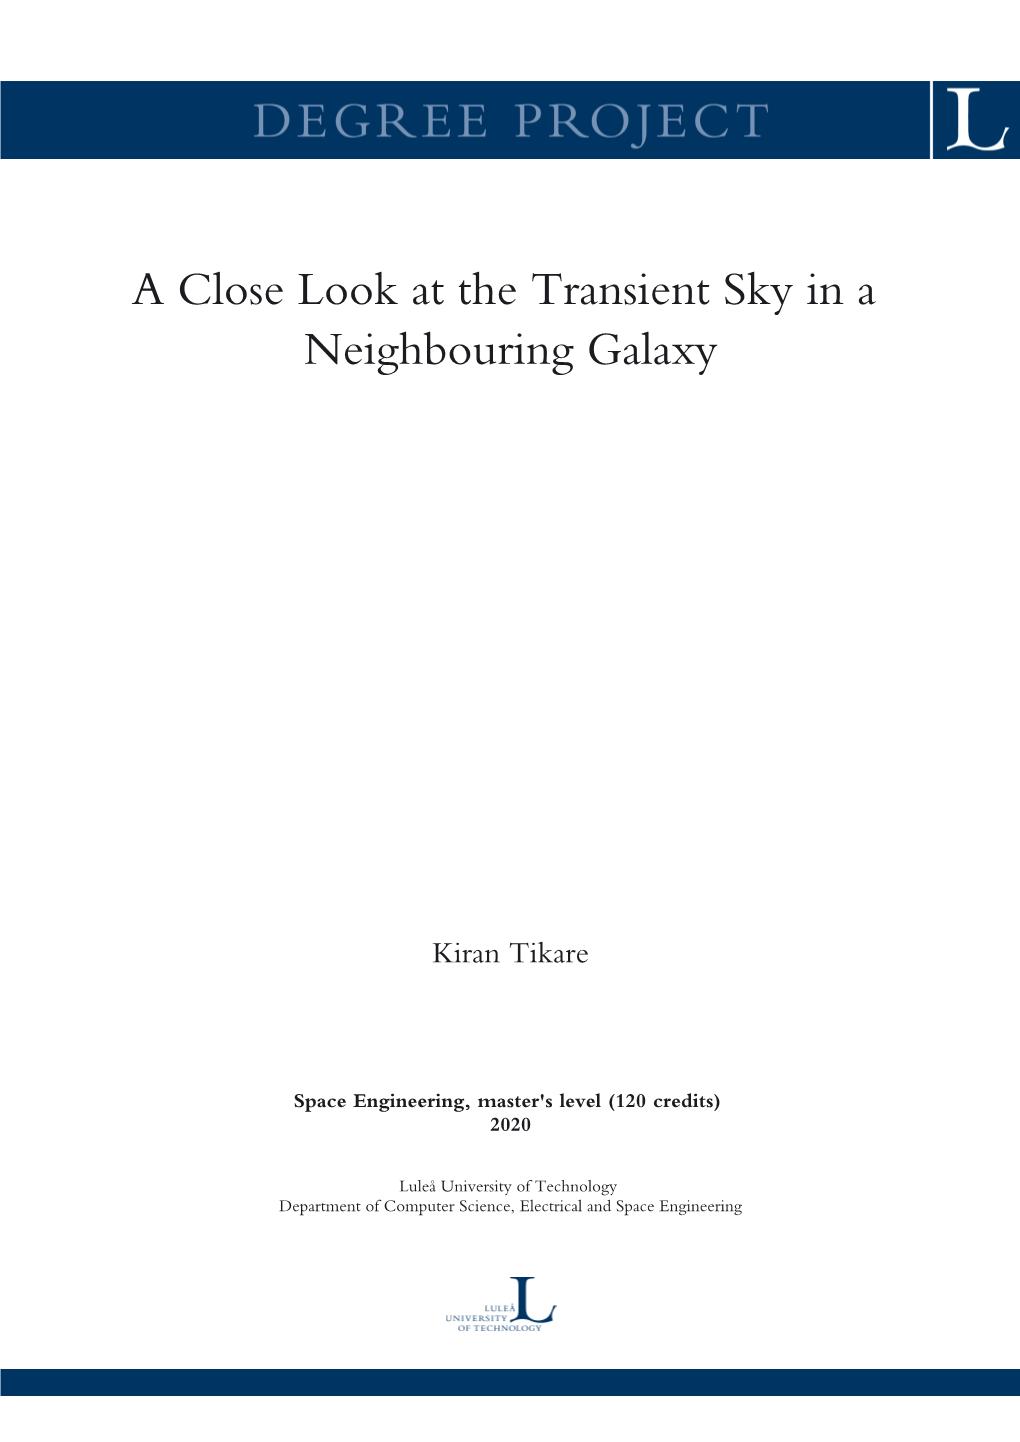 A Close Look at the Transient Sky in a Neighbouring Galaxy